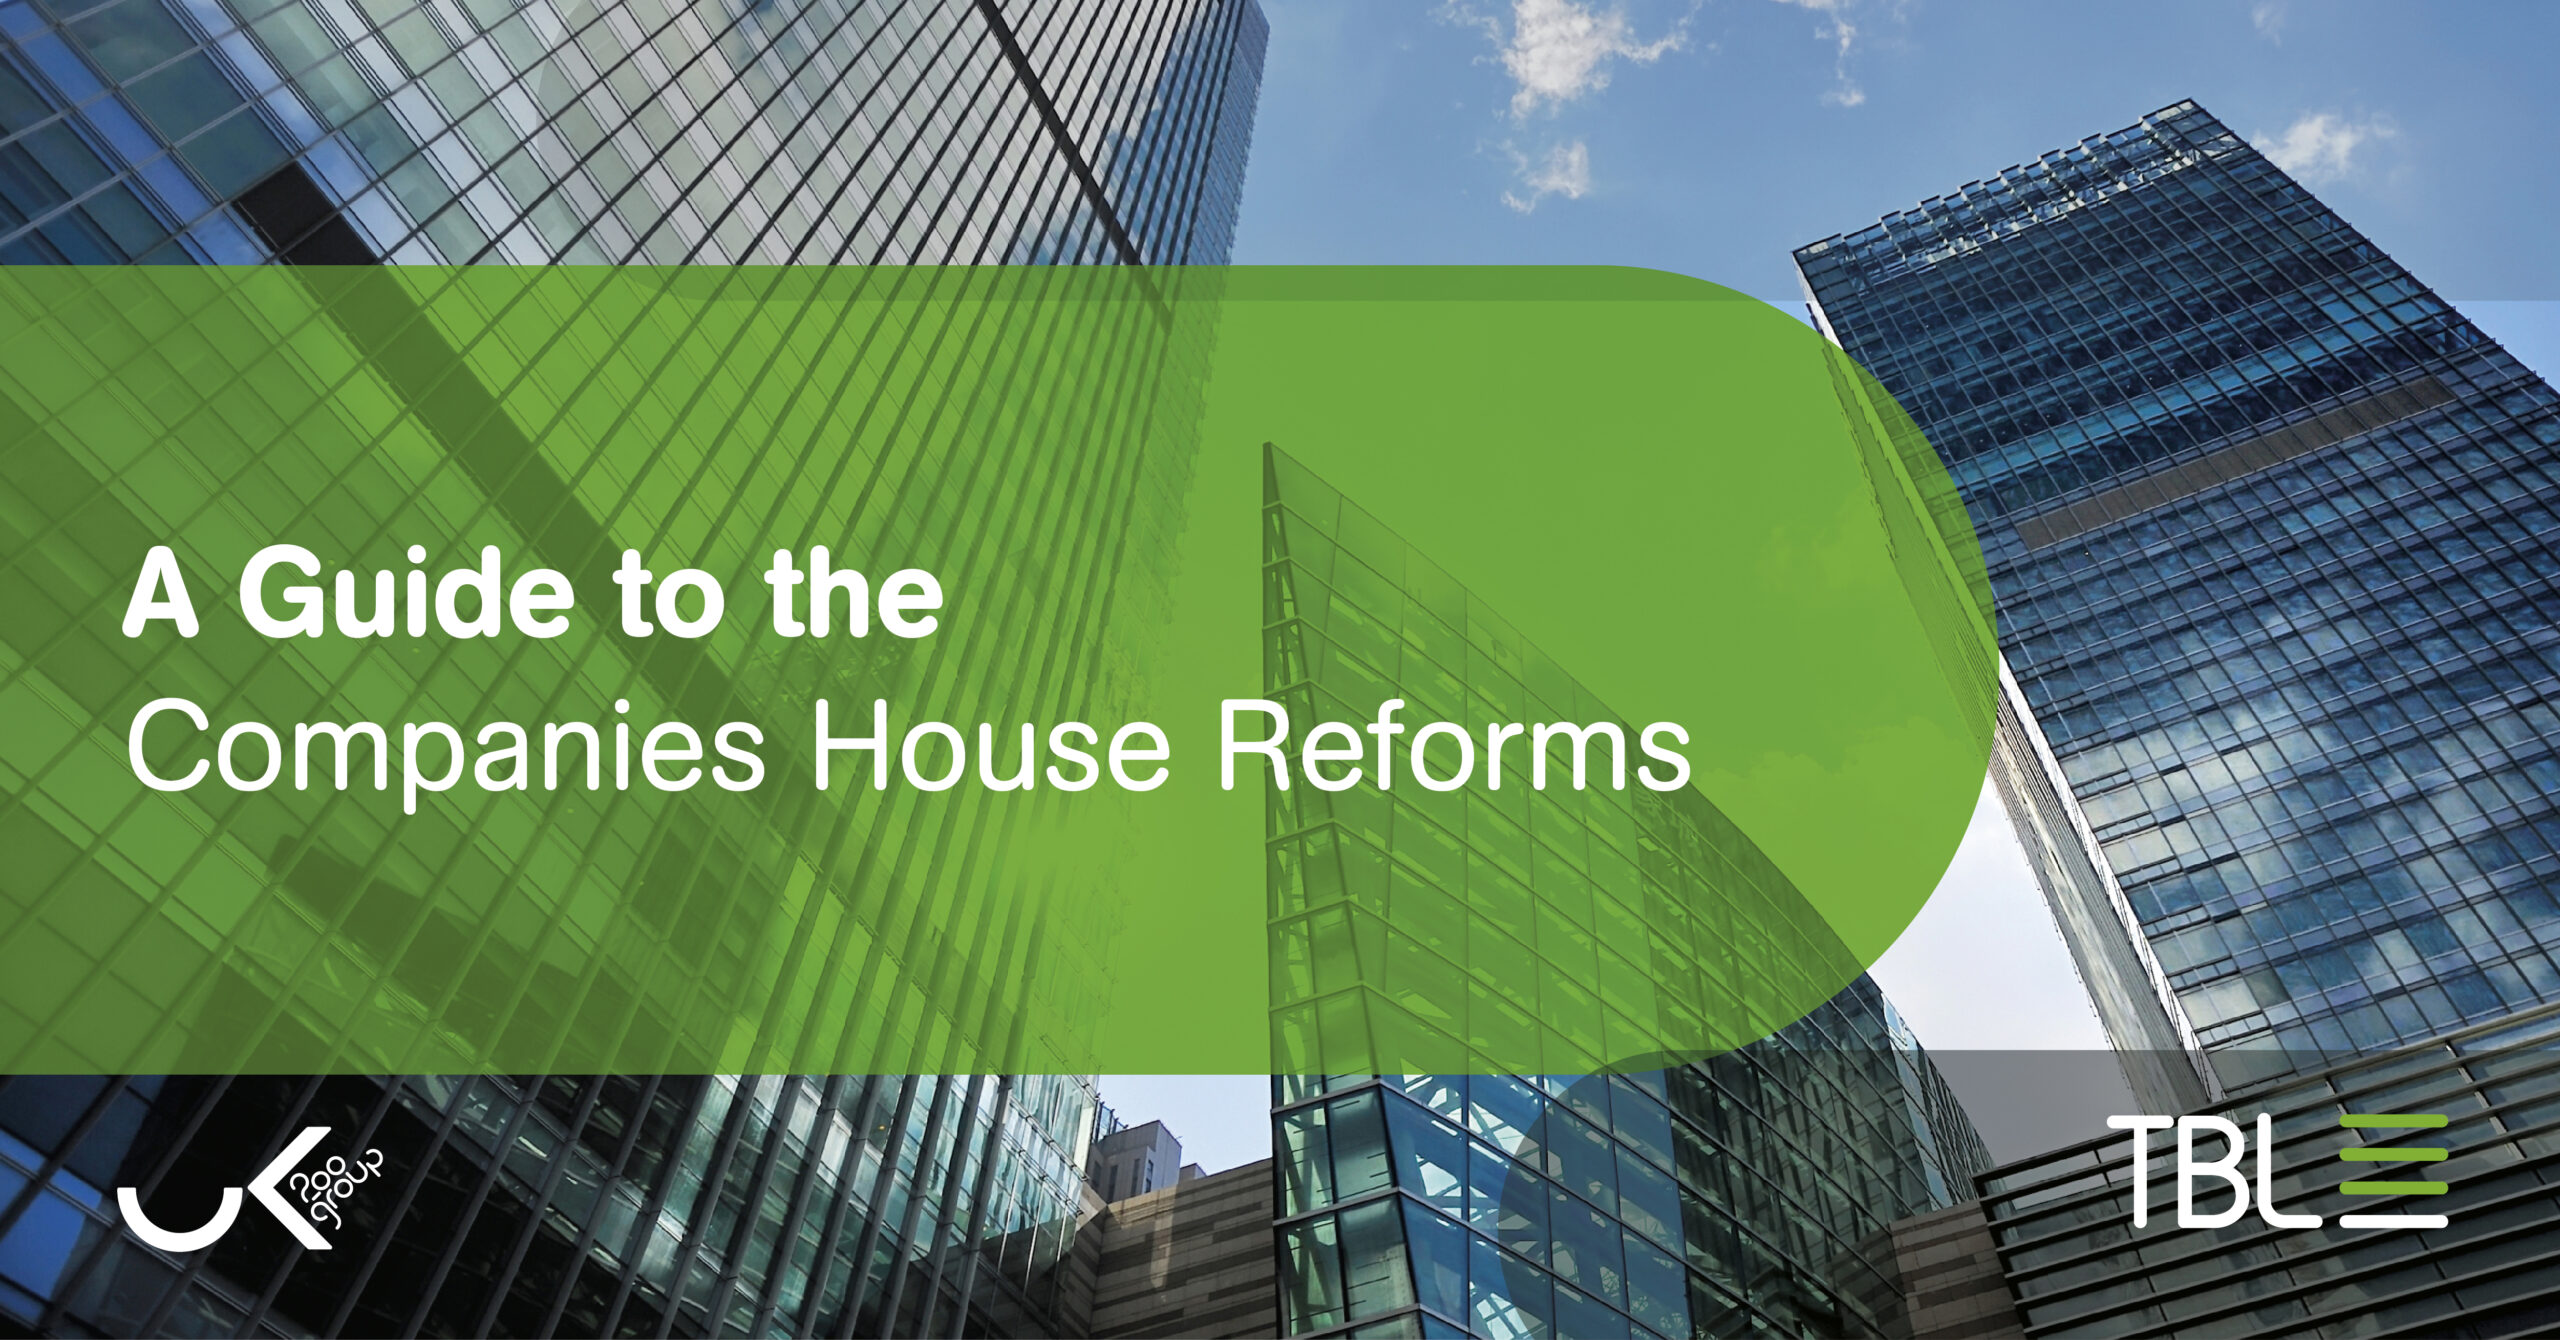 A Guide to the Companies House Reforms